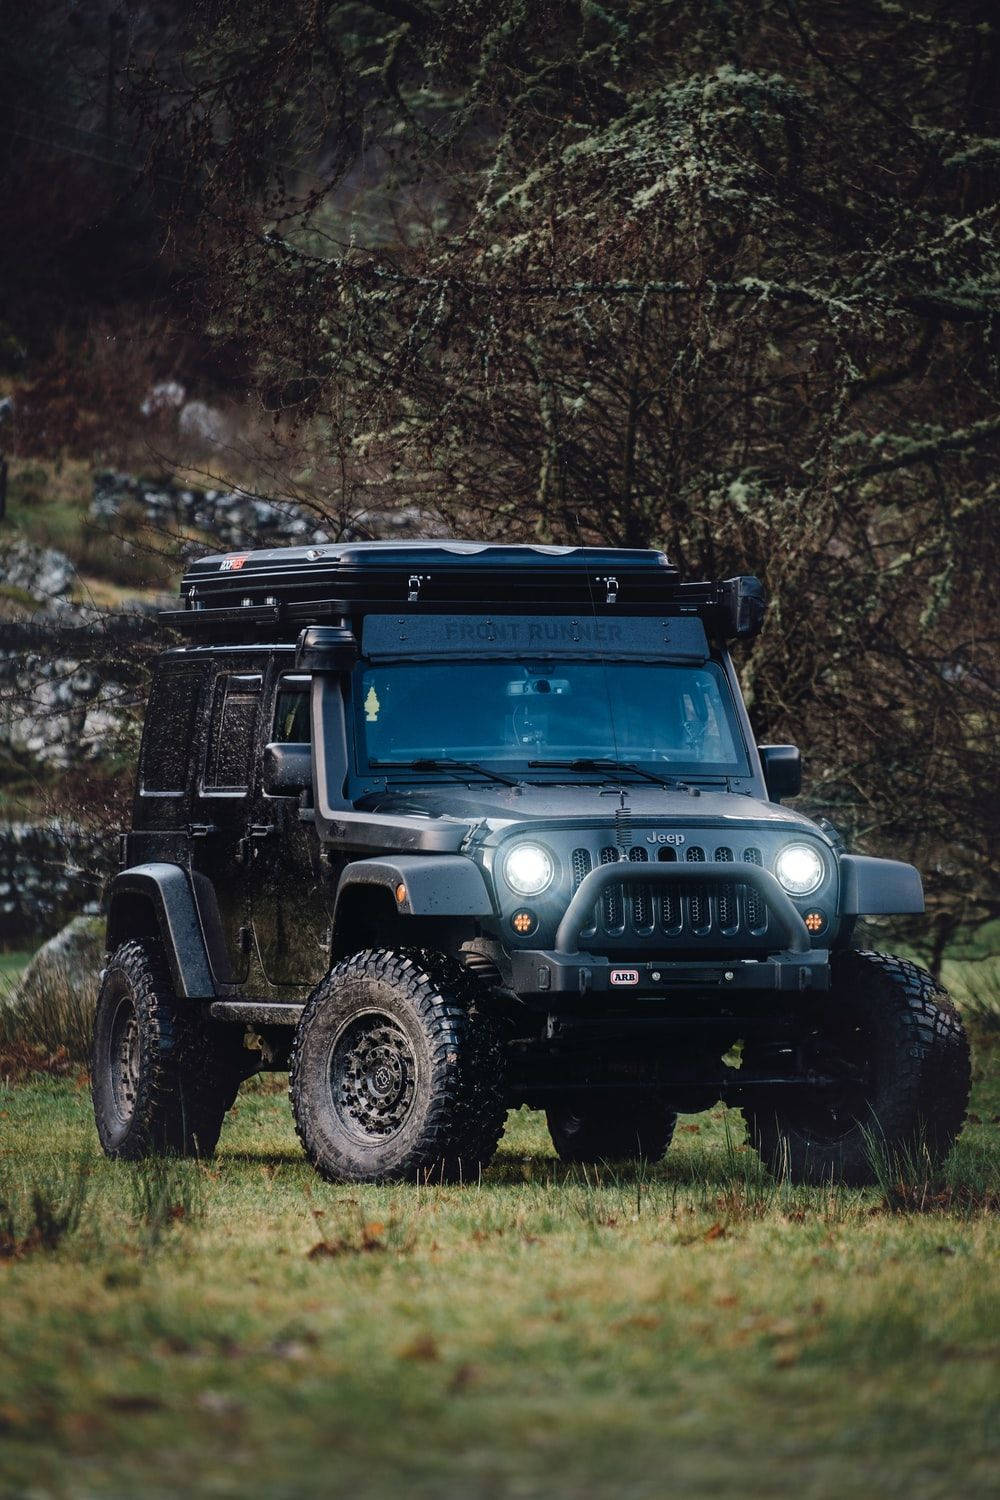 Dynamic Black Jeep Wrangler with Top Rack Over Rugged Terrain Wallpaper